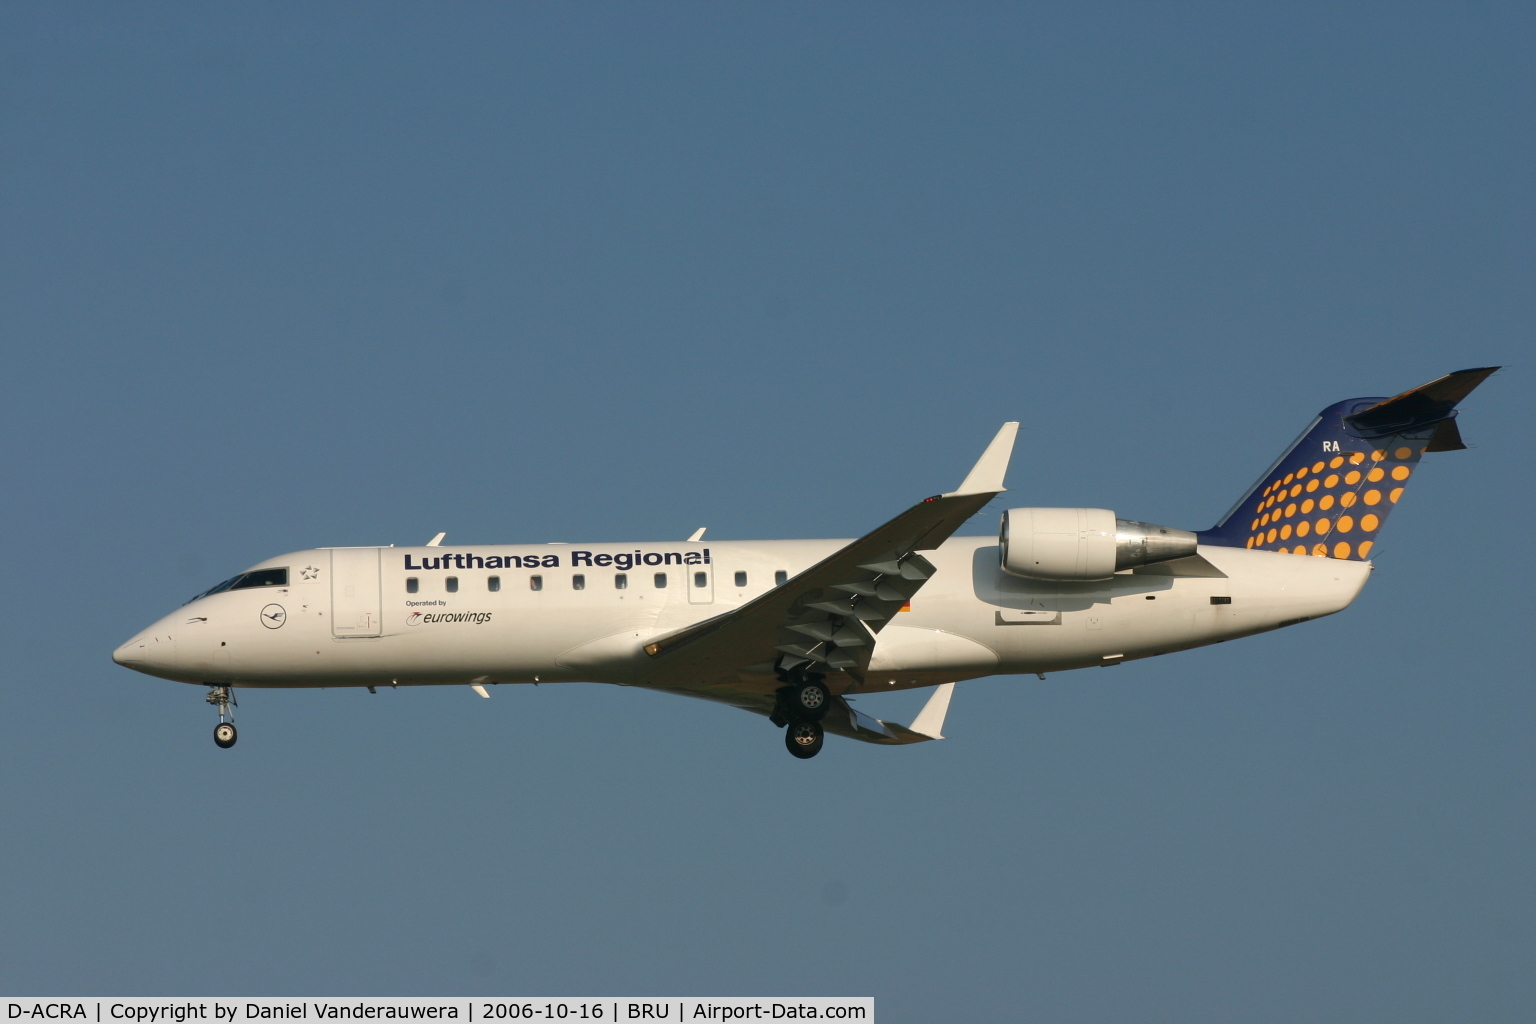 D-ACRA, Canadair CRJ-200ER (CL-600-2B19) C/N 7567, new livery for this Eurowings aircraft (LH Regional)